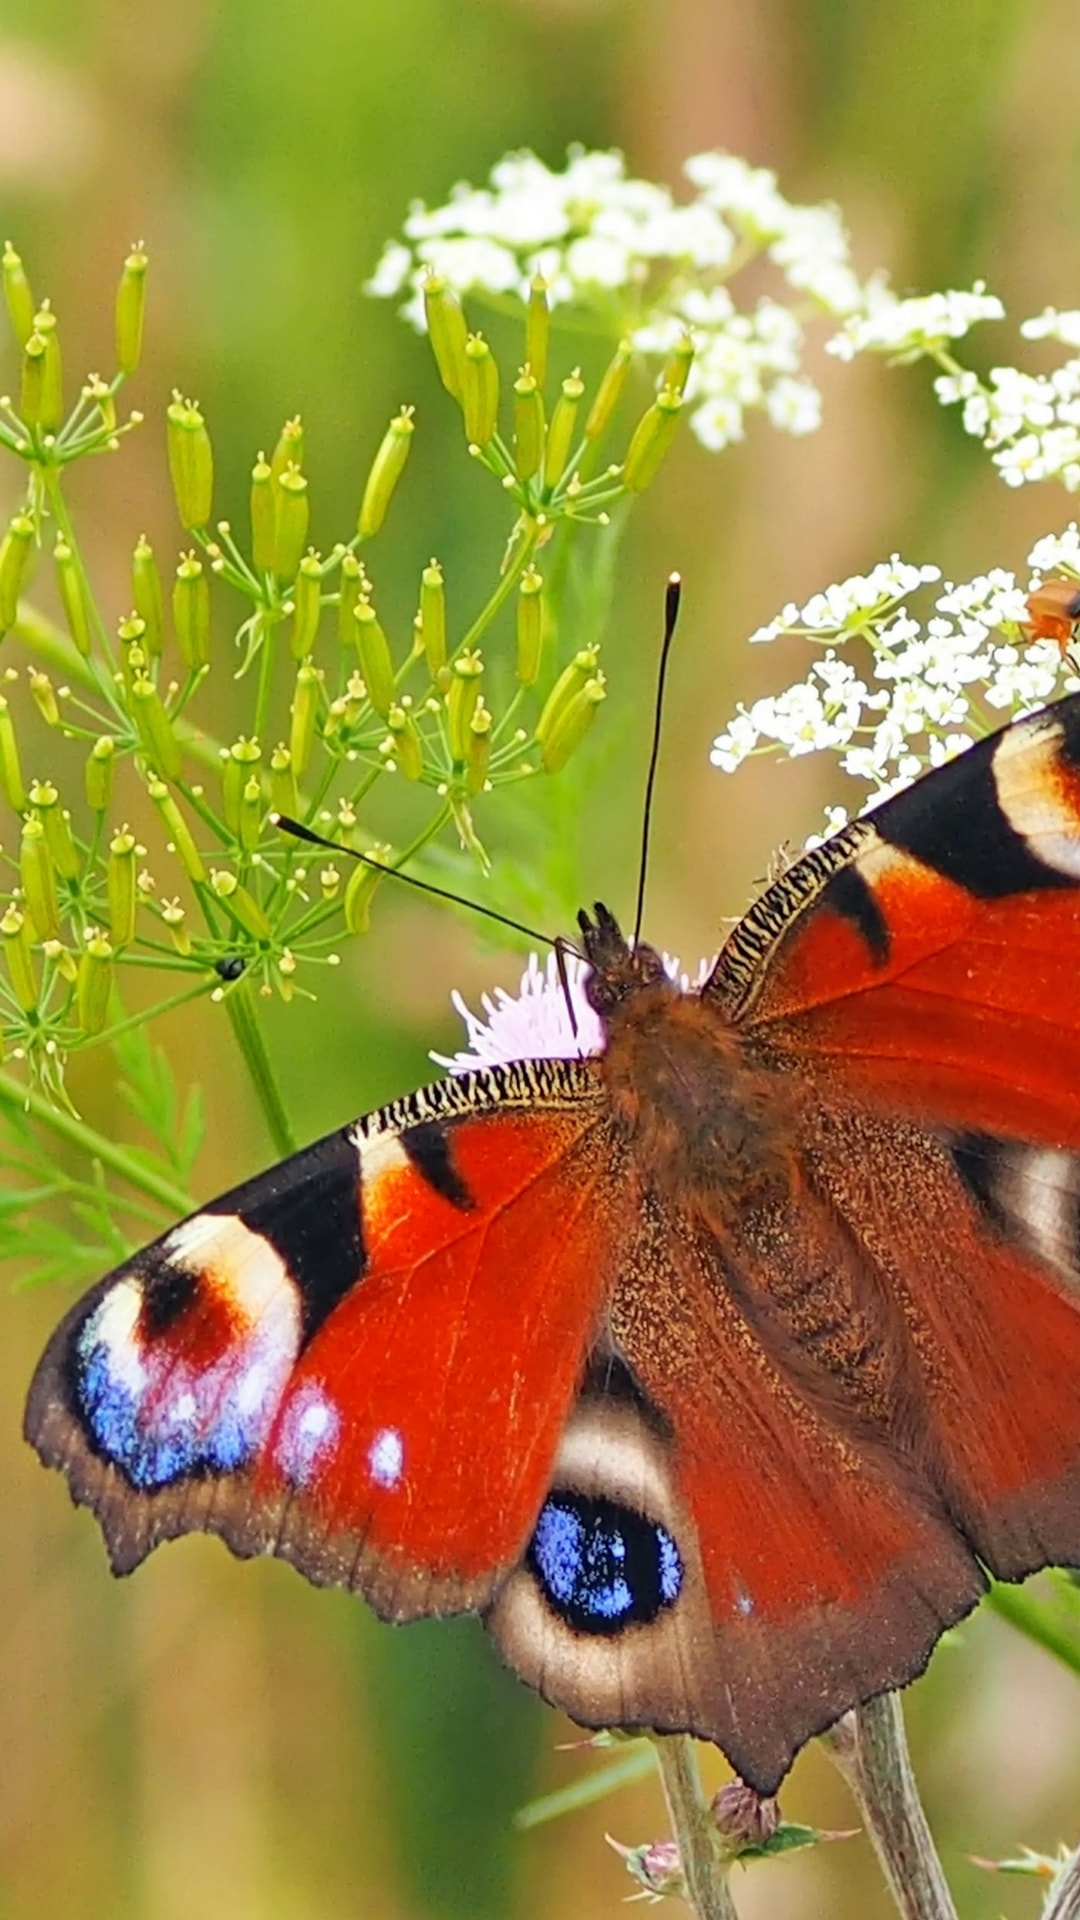 hd wallpapers for android mobile free download,moths and butterflies,butterfly,cynthia (subgenus),insect,aglais io